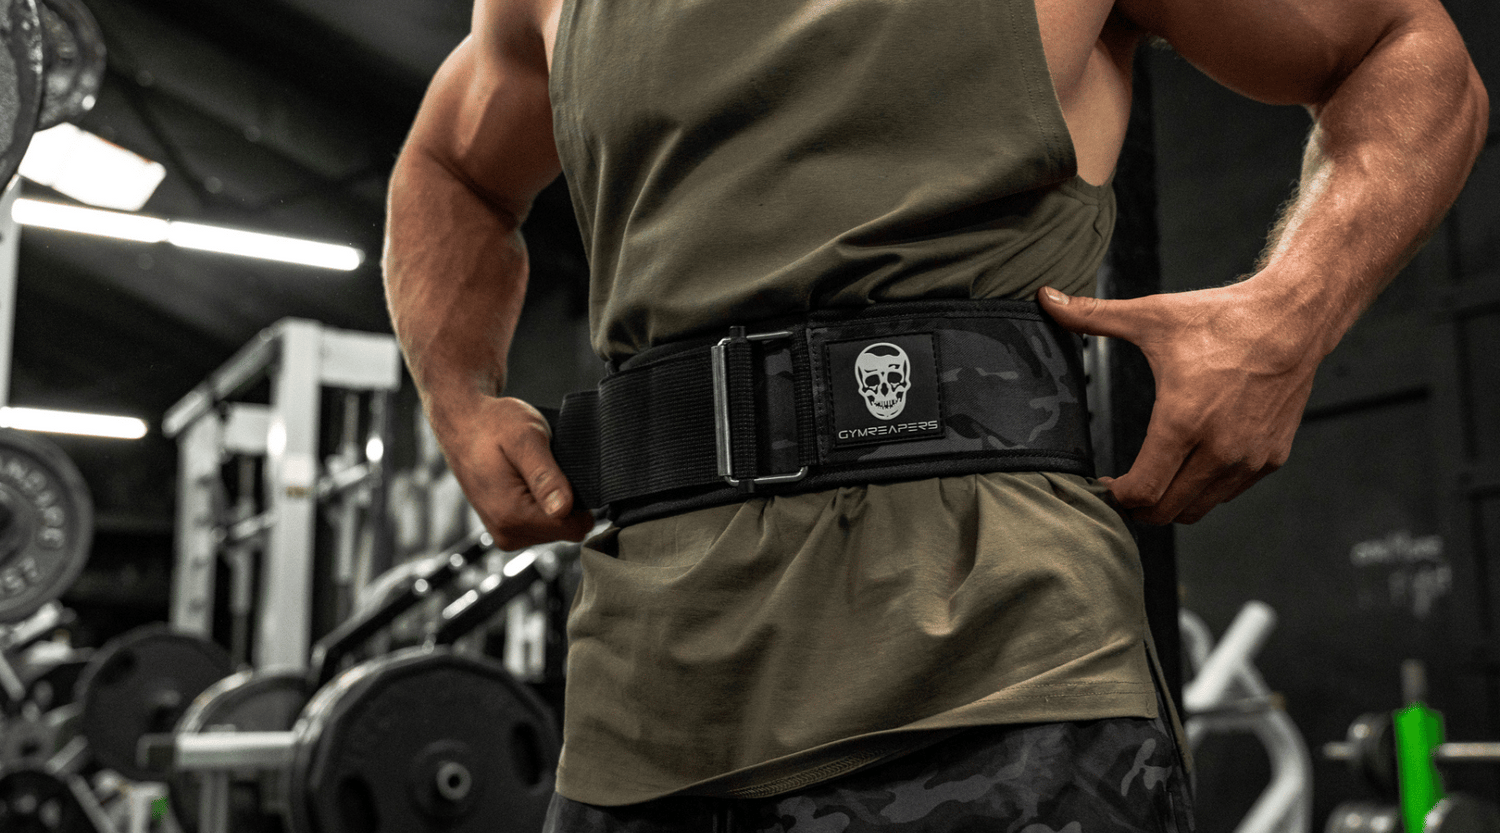 Olympic Lifting Belt vs Powerlifting Belt: What Are The Differences?